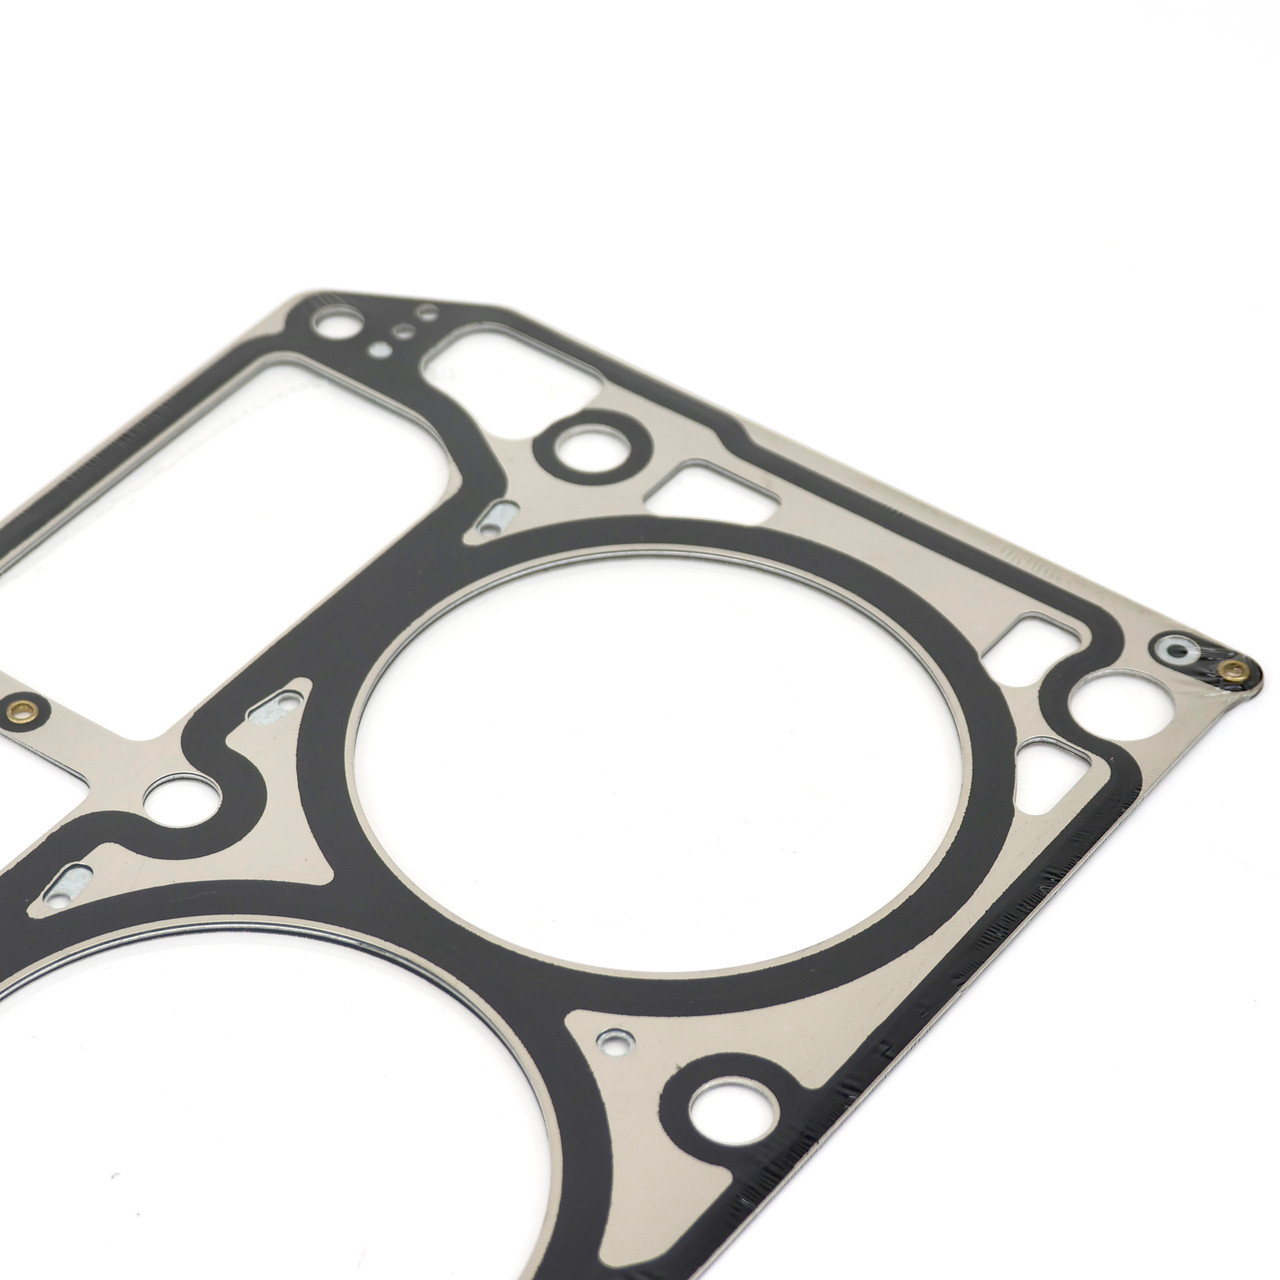 MLS Head Gasket for early Notched LS1 and LS Truck Heads 4.8L 5.3L 5.7L 806 853 862